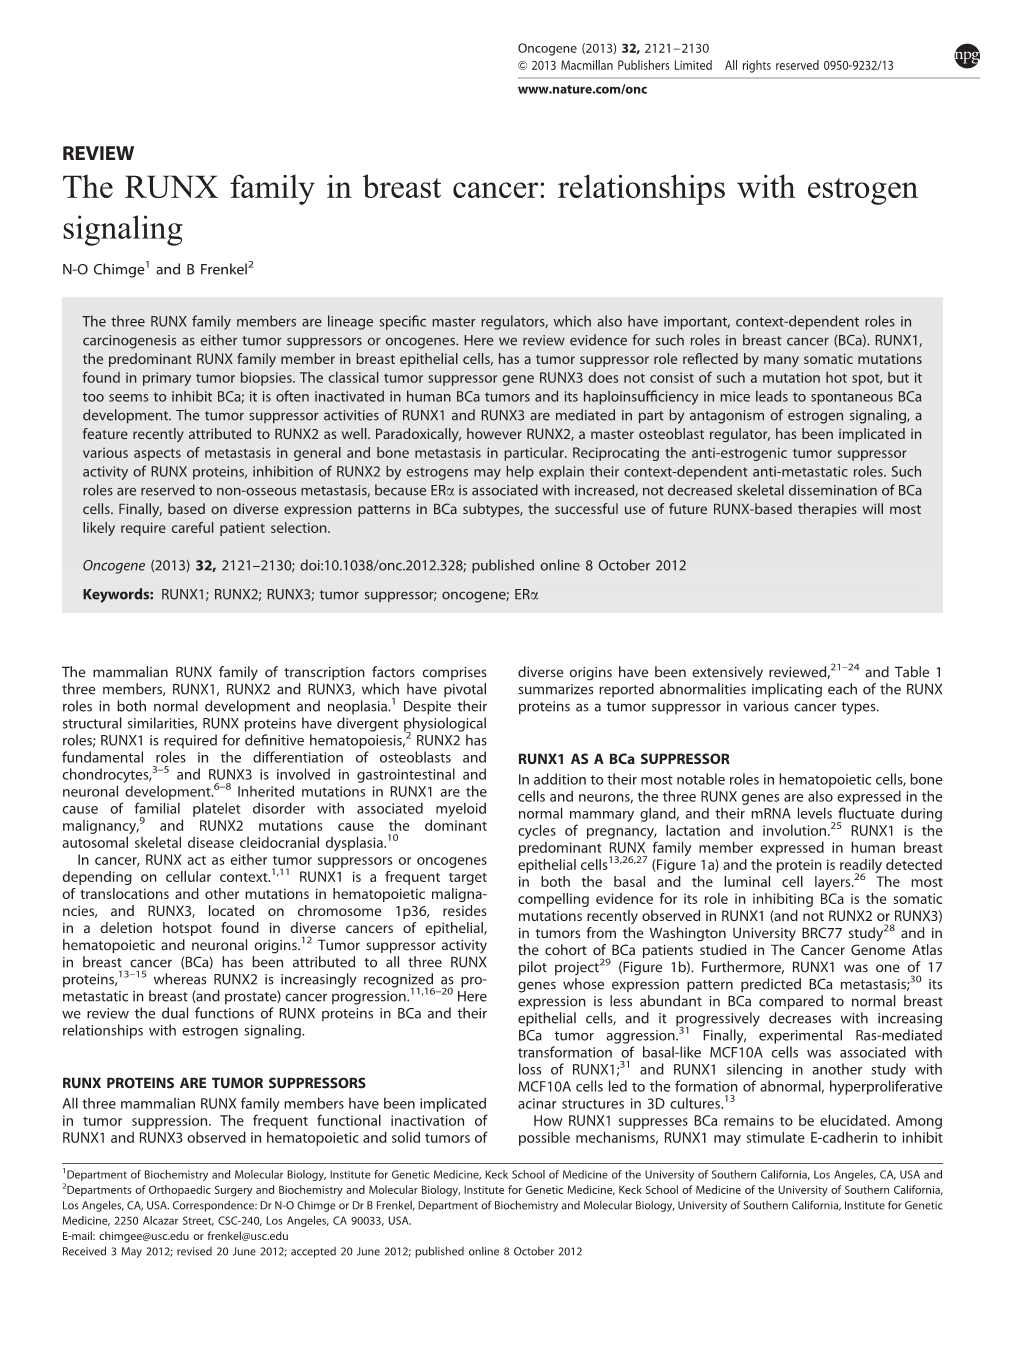 The RUNX Family in Breast Cancer: Relationships with Estrogen Signaling